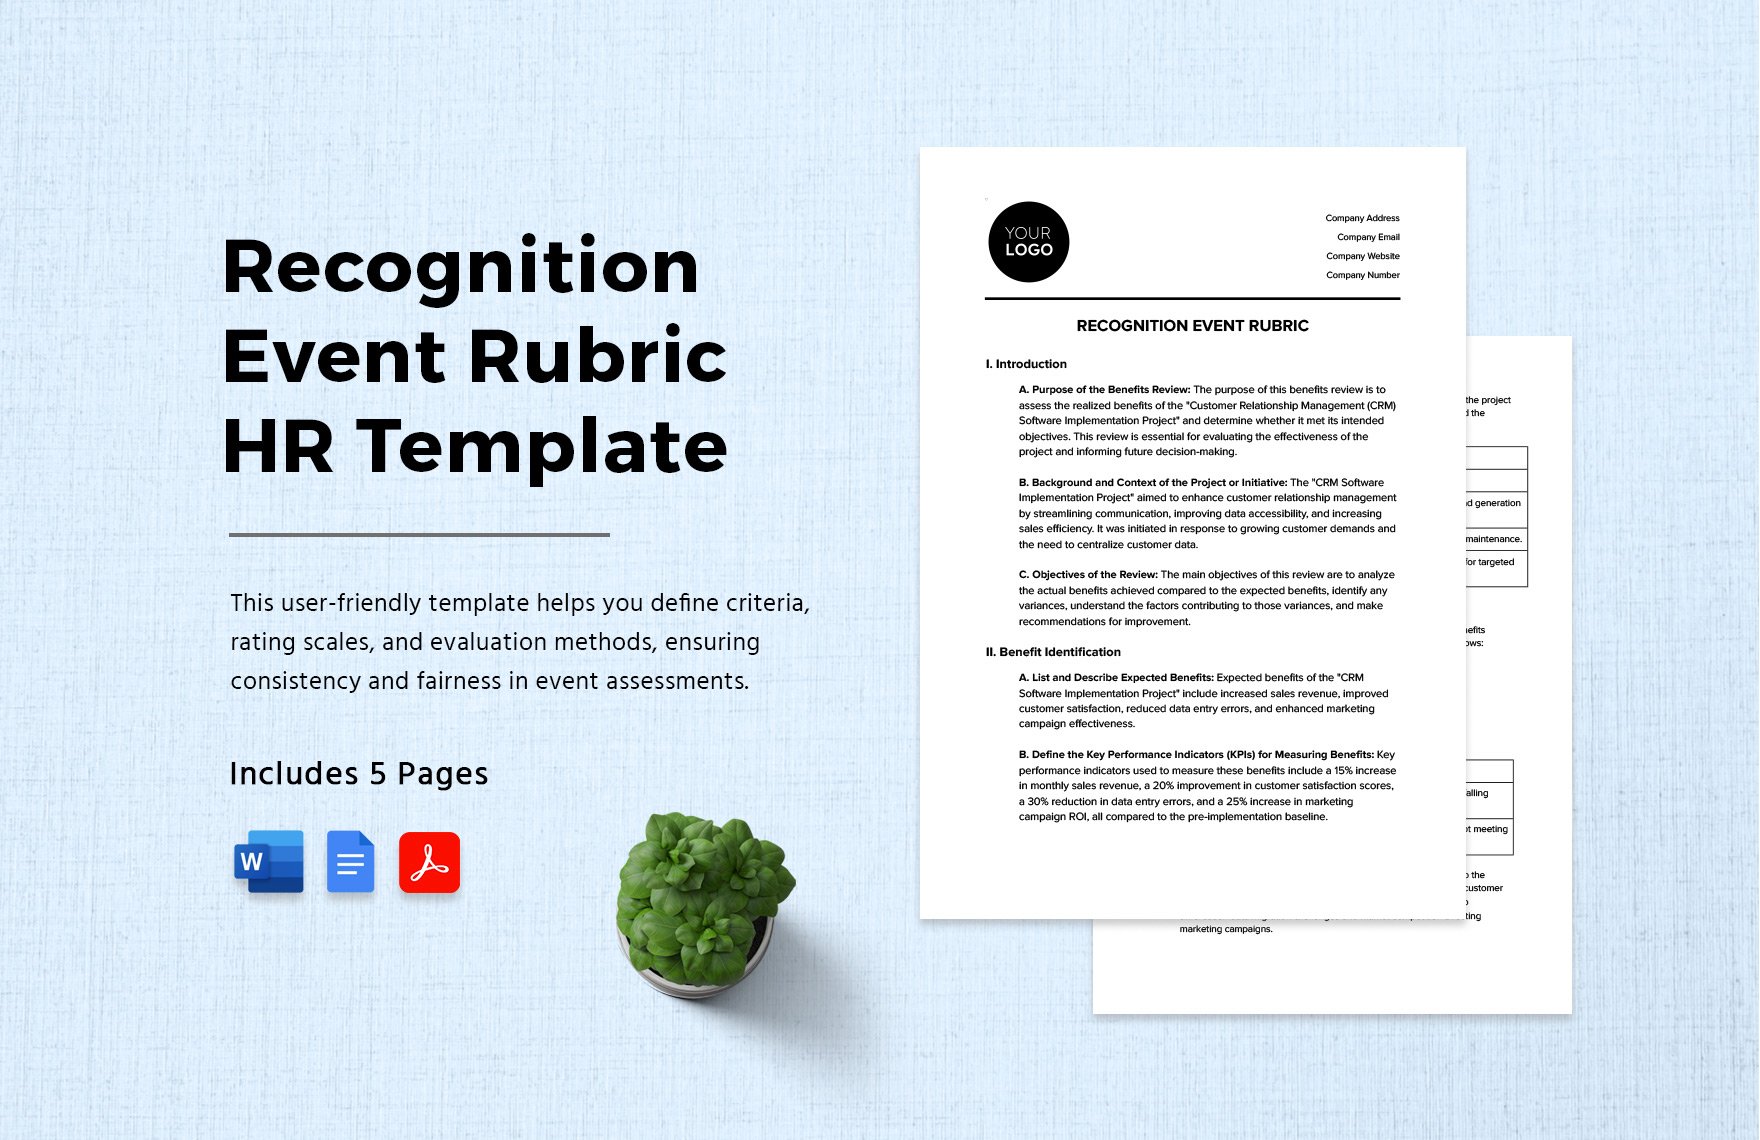 Recognition Event Rubric HR Template